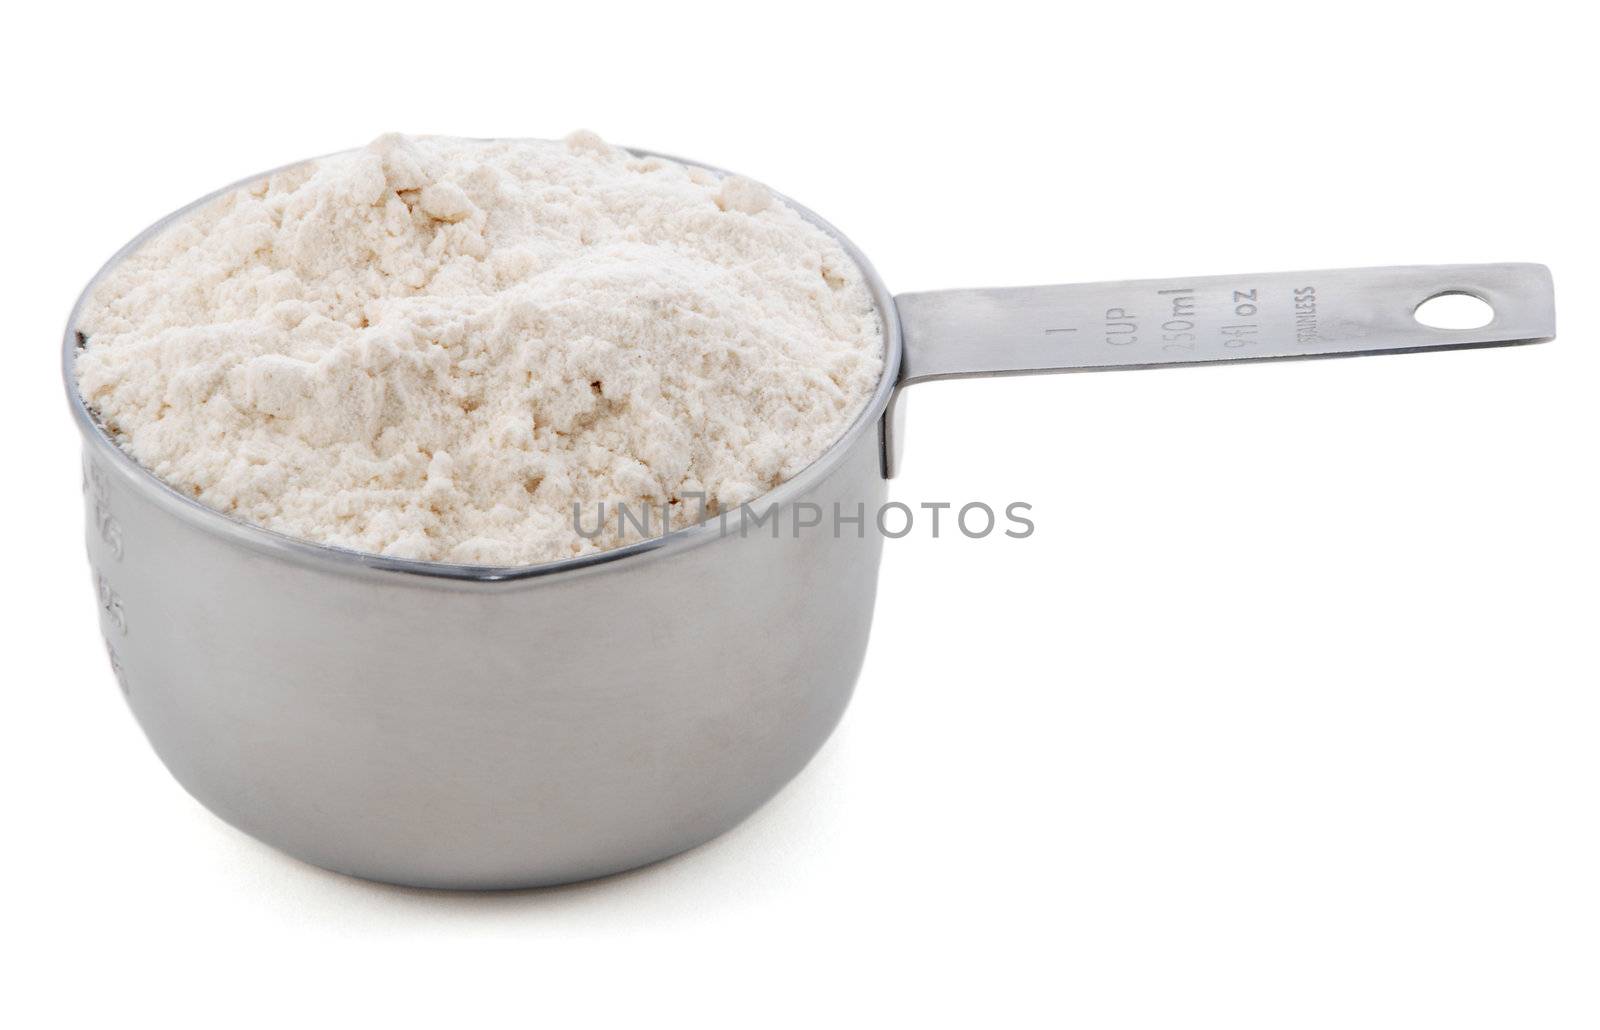 Plain / all purpose flour presented in an American metal cup measure, isolated on a white background